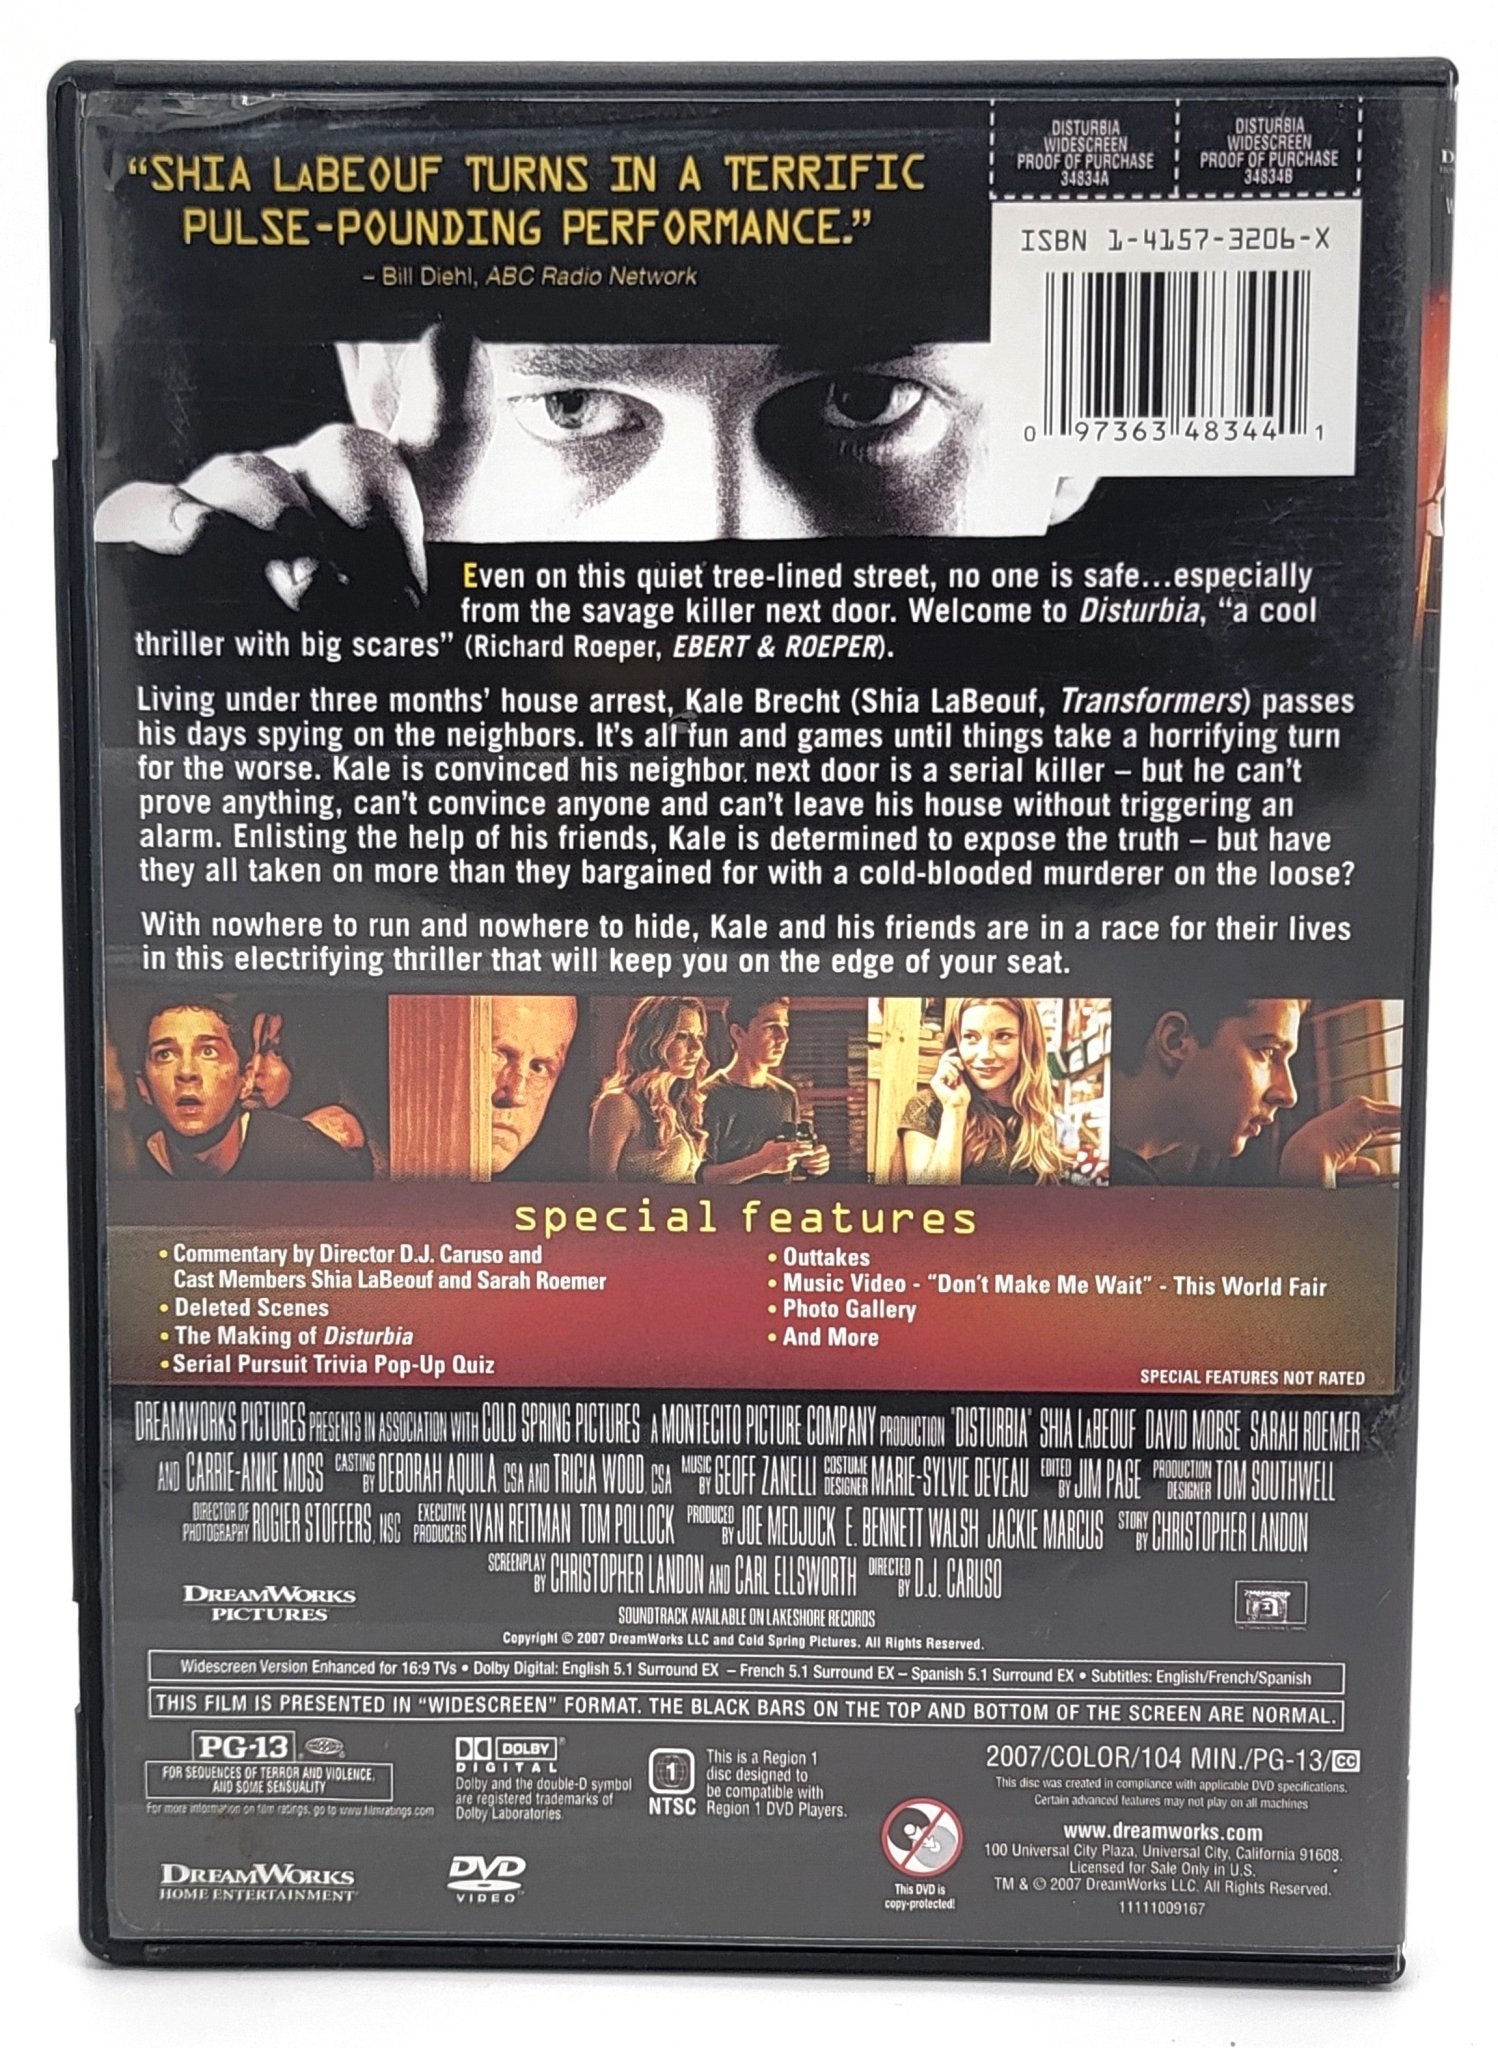 Paramount Pictures Home Entertainment - Disturbia | DVD | Widescreen - DVD - Steady Bunny Shop